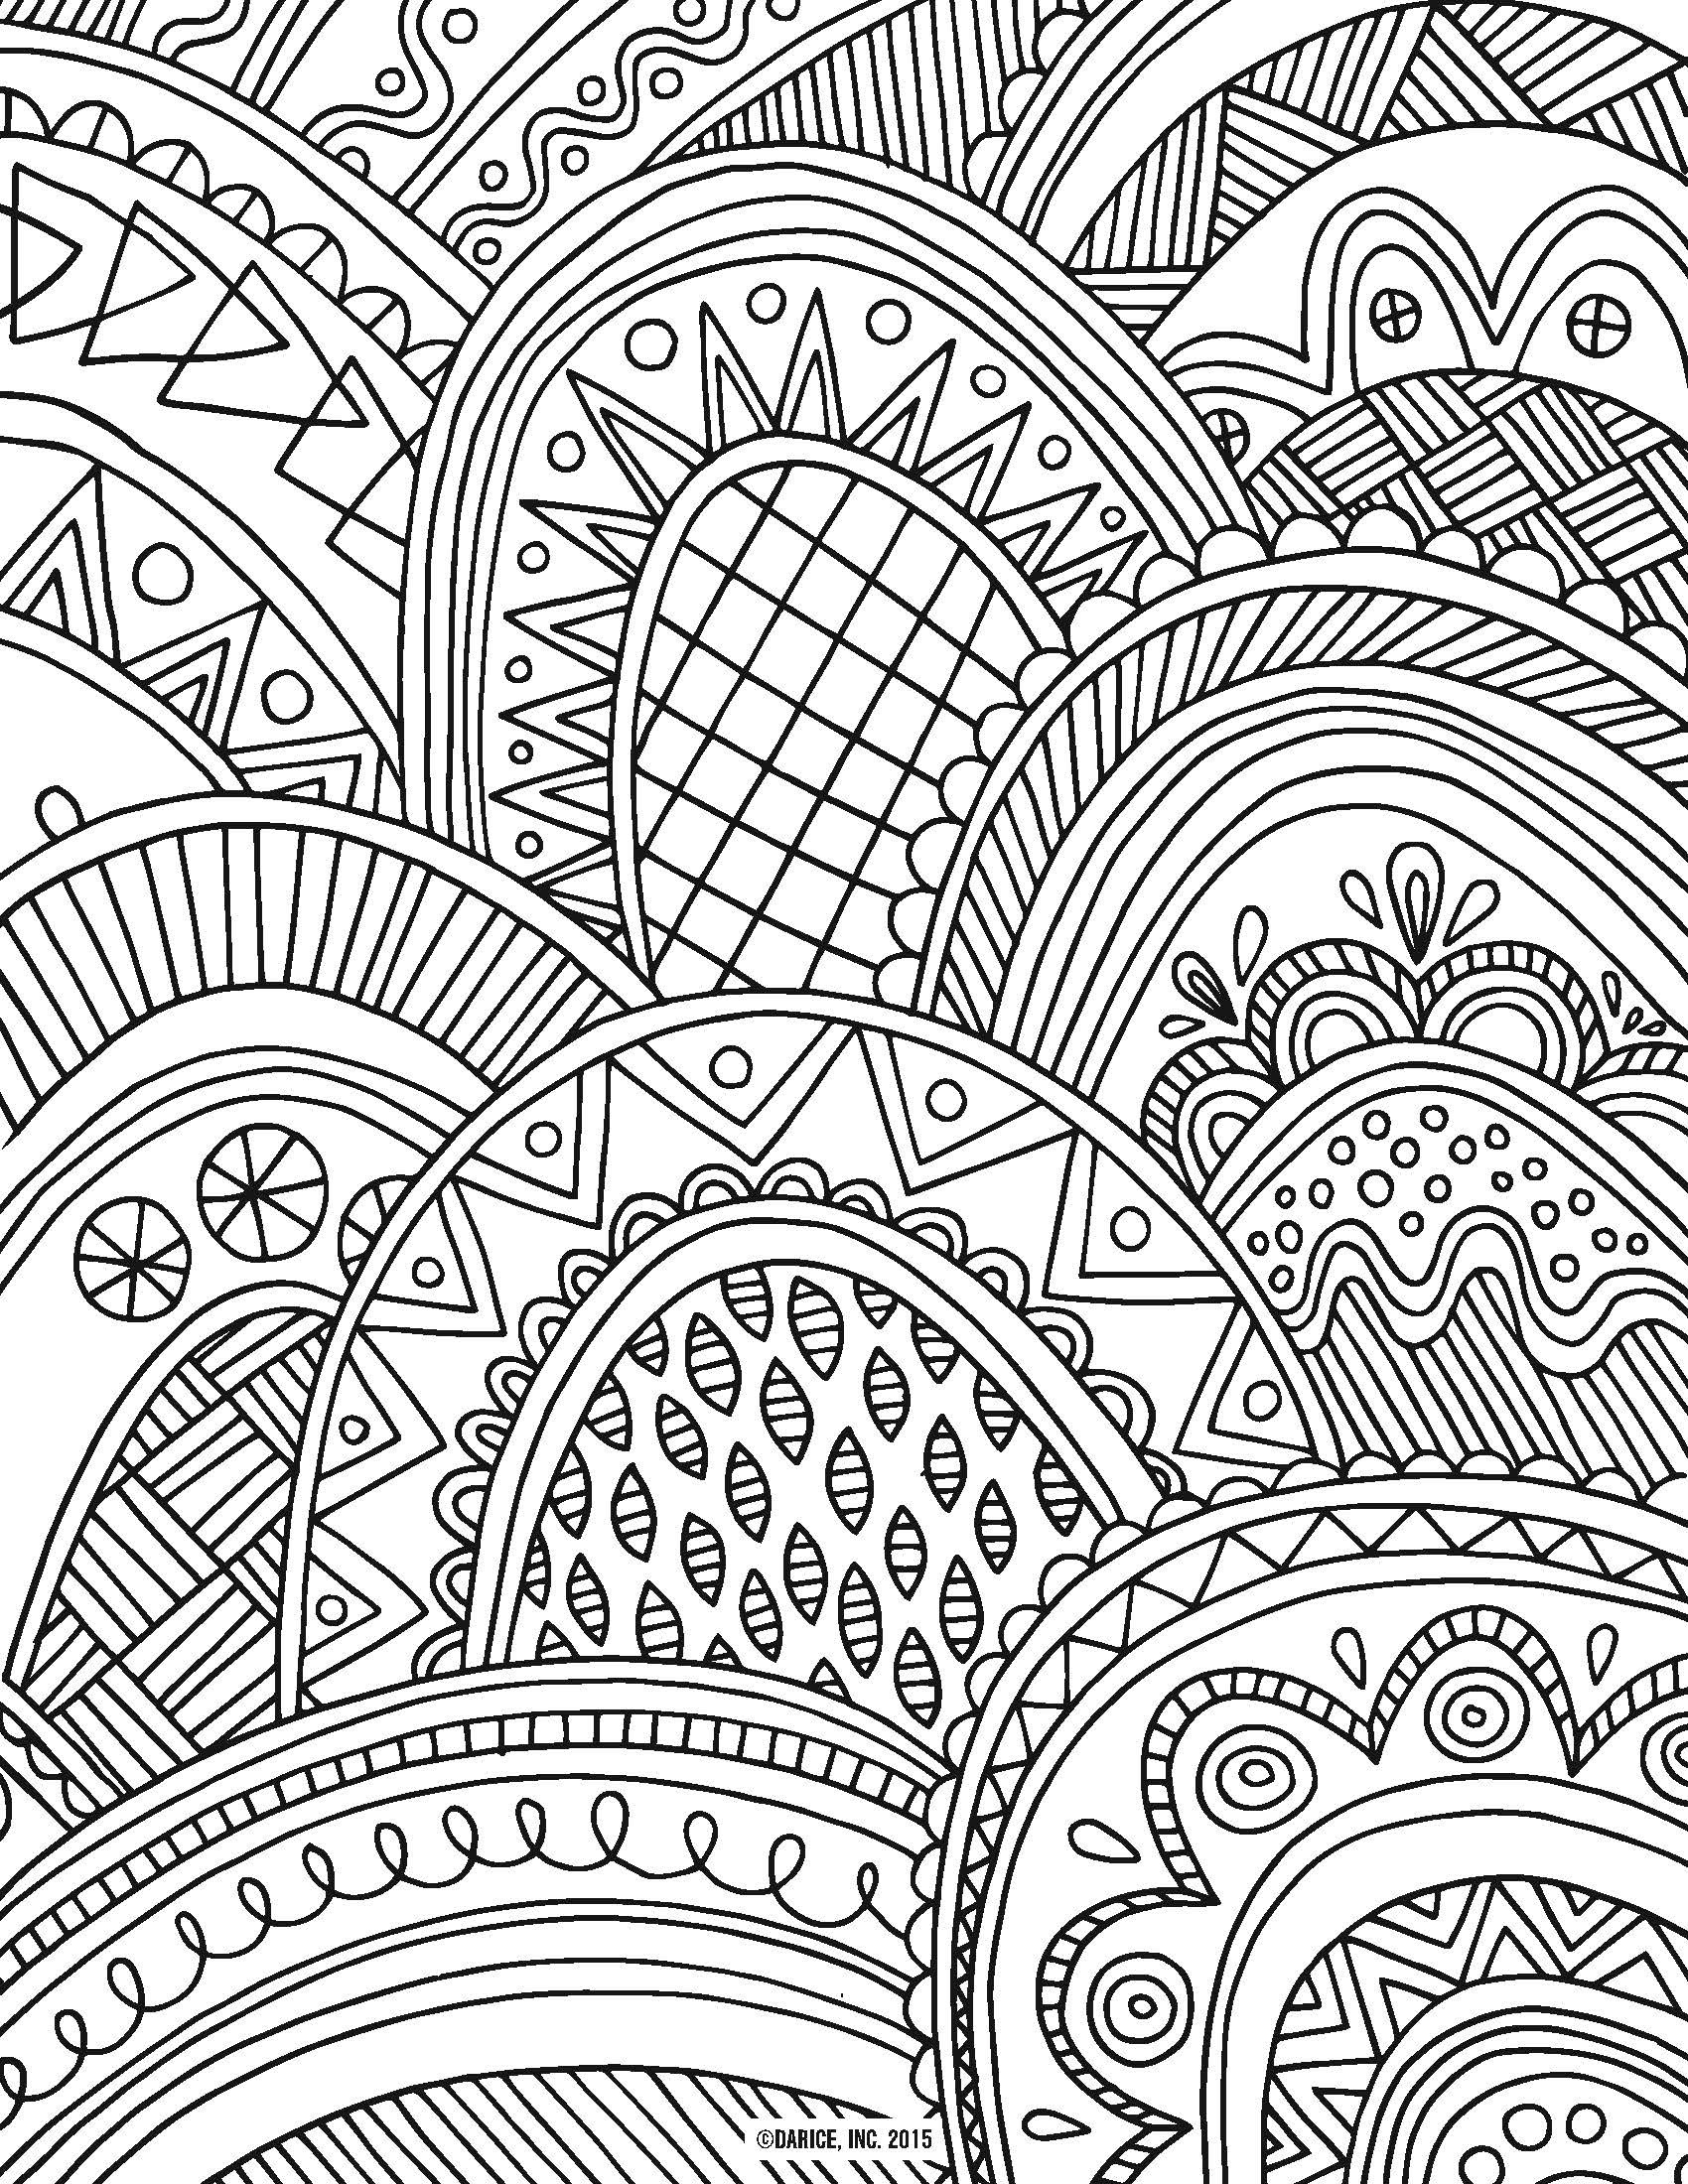 Coloring Pages For Adults Patterns
 20 Attractive Coloring Pages For Adults We Need Fun